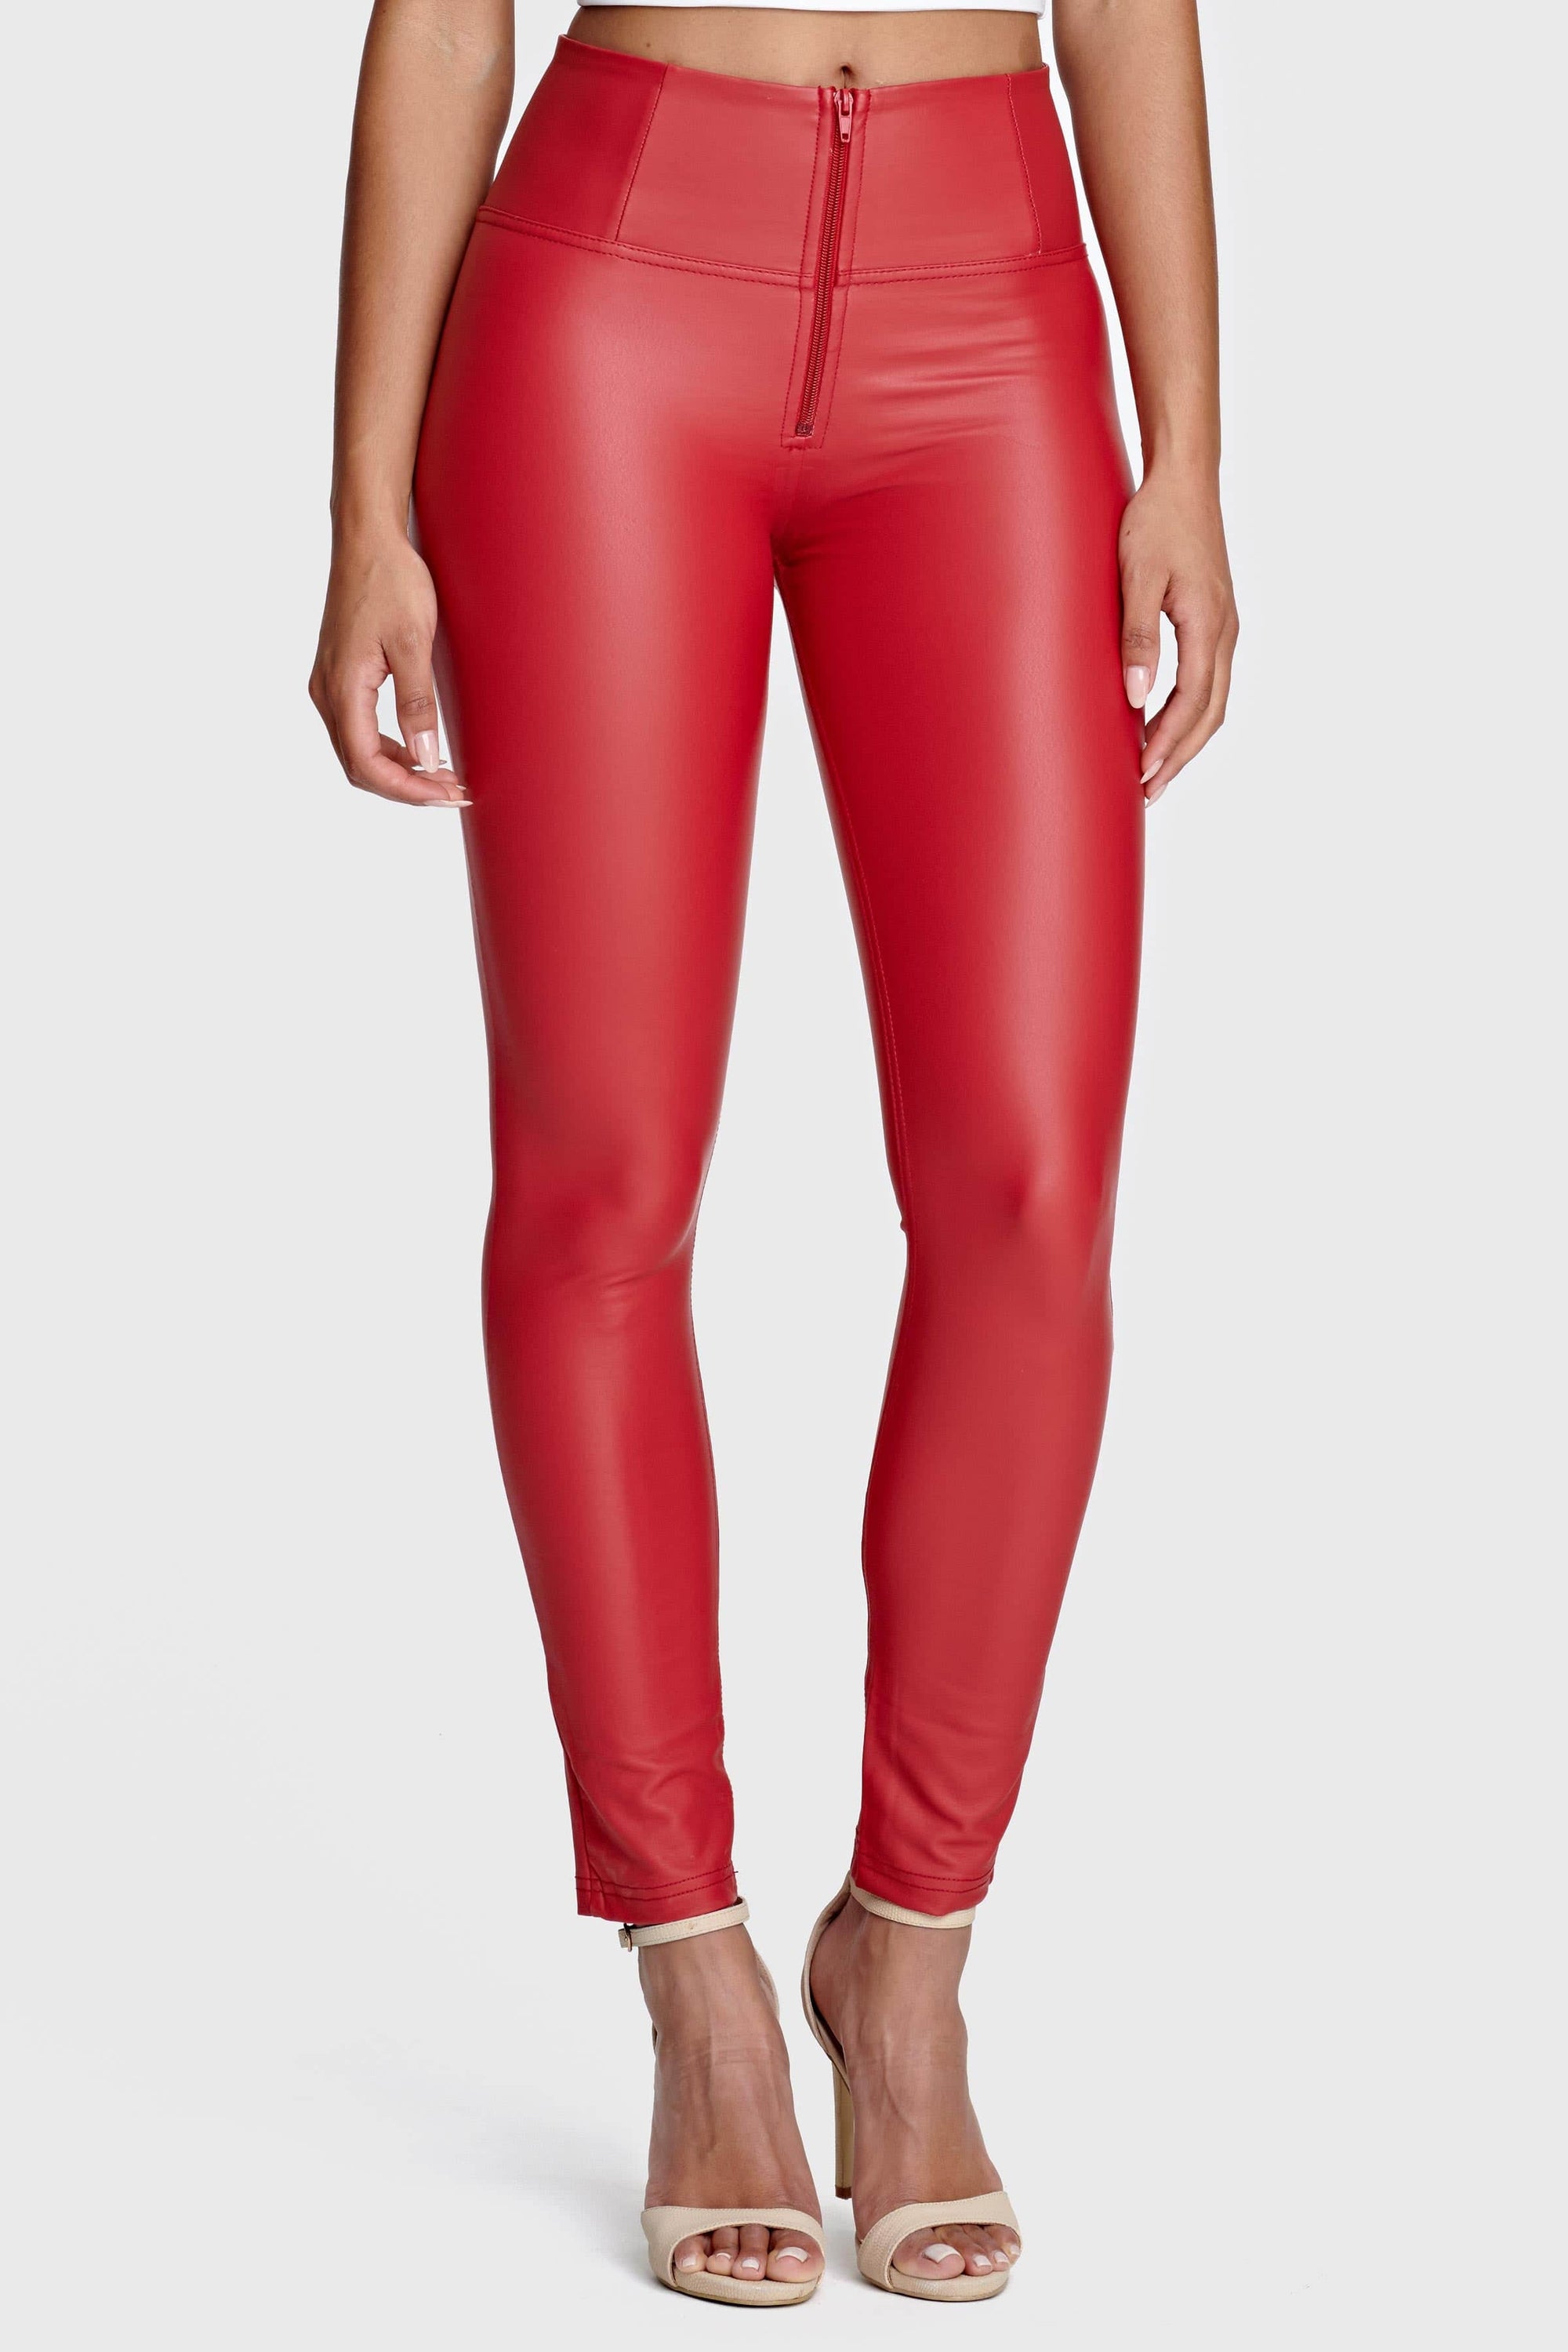 WR.UP® Faux Leather - High Waisted - Full Length - Red 3